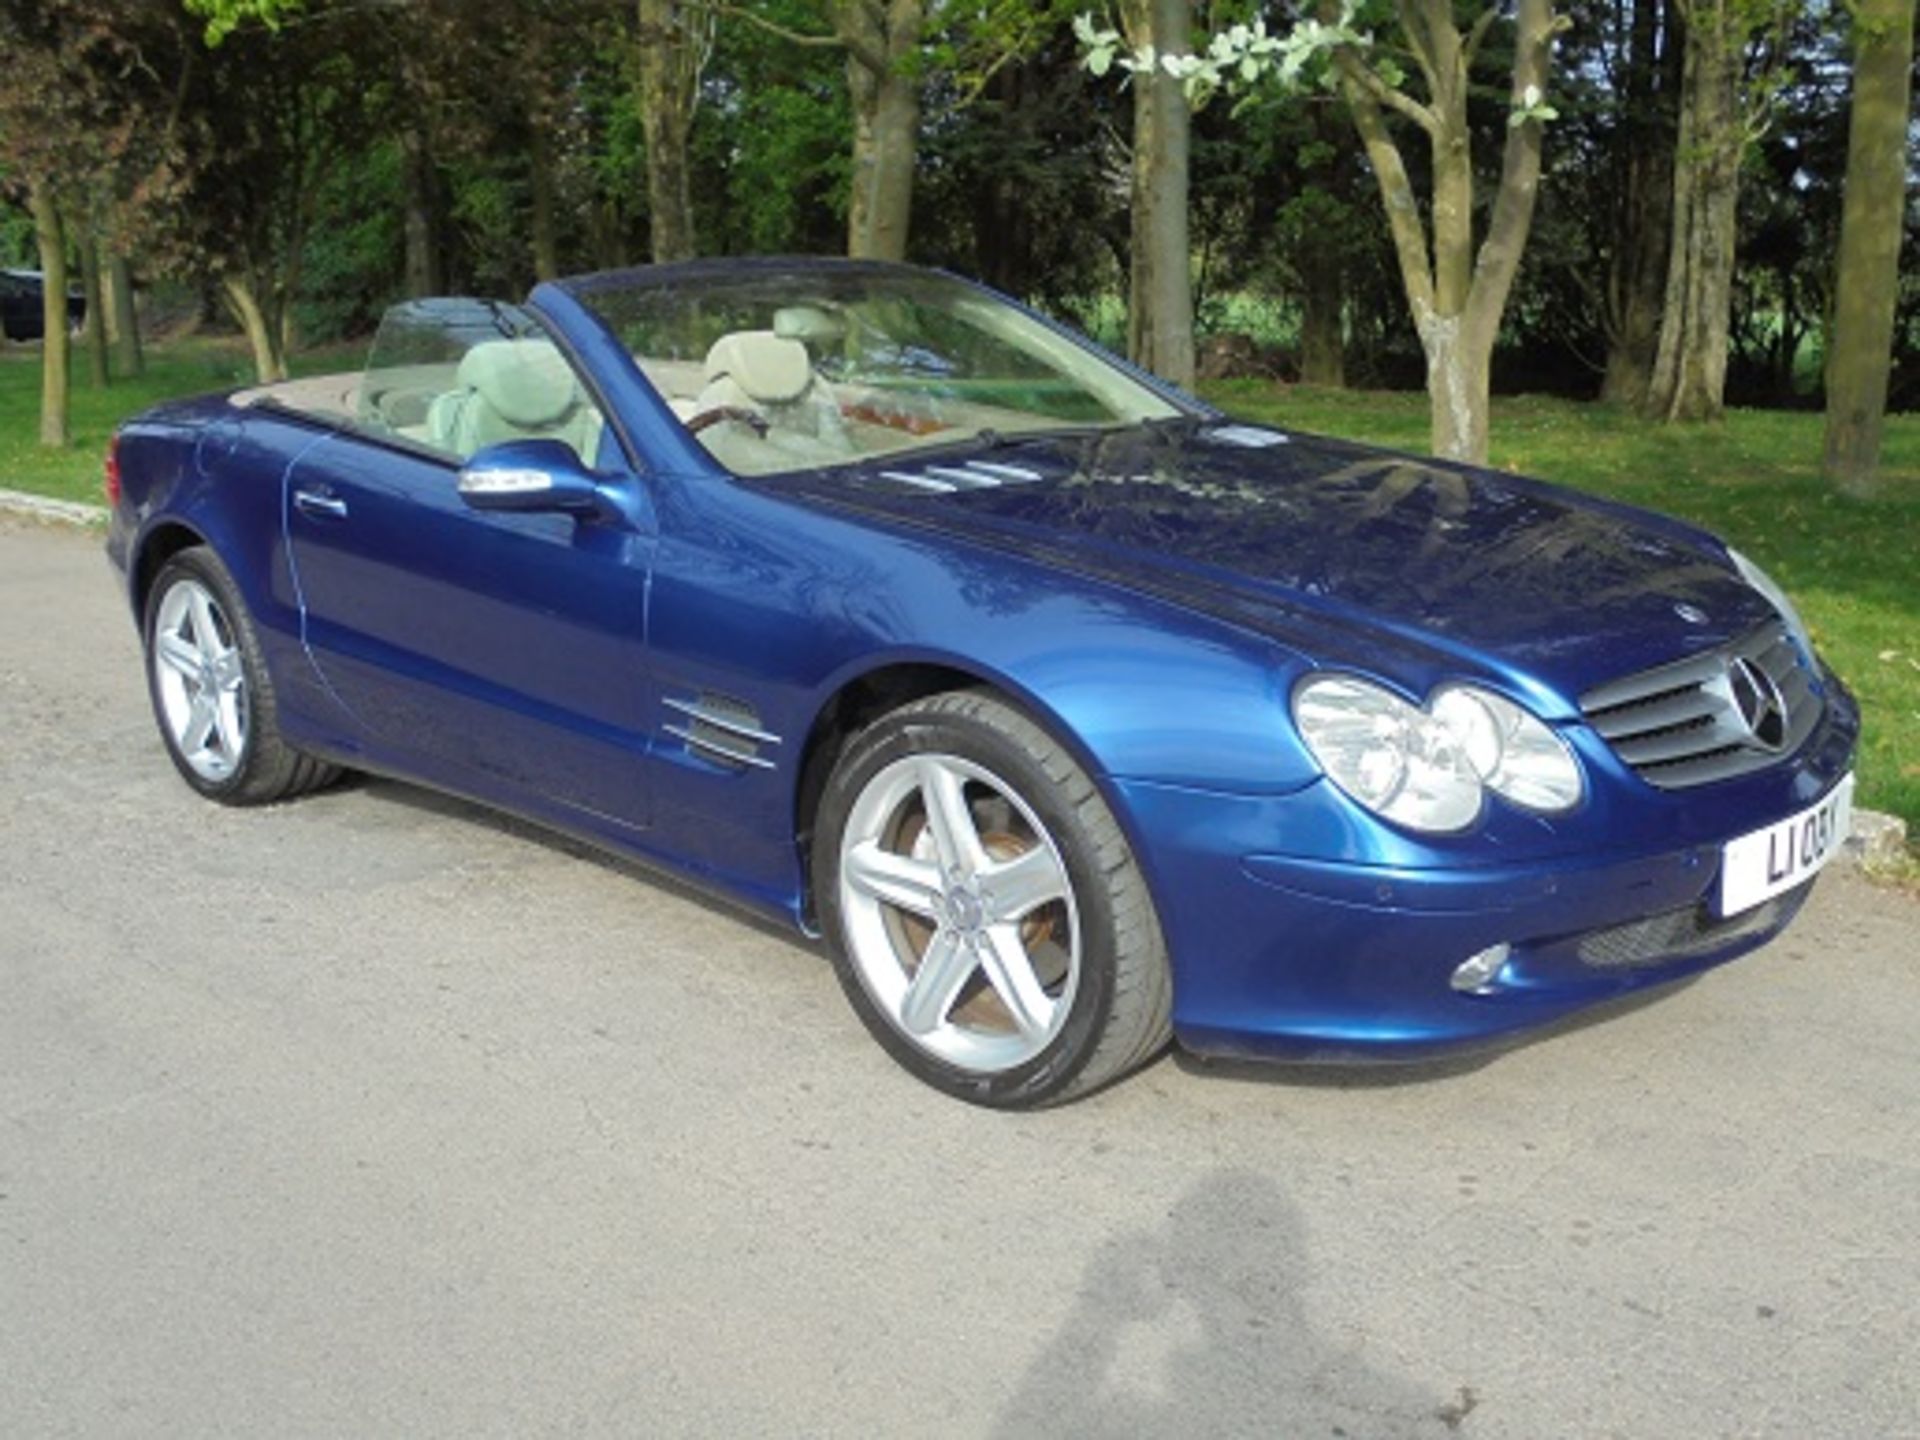 MERCEDES SL350 CONVERTIBLE WITH PRIVATE PLATE: L1OBY INCLUDED